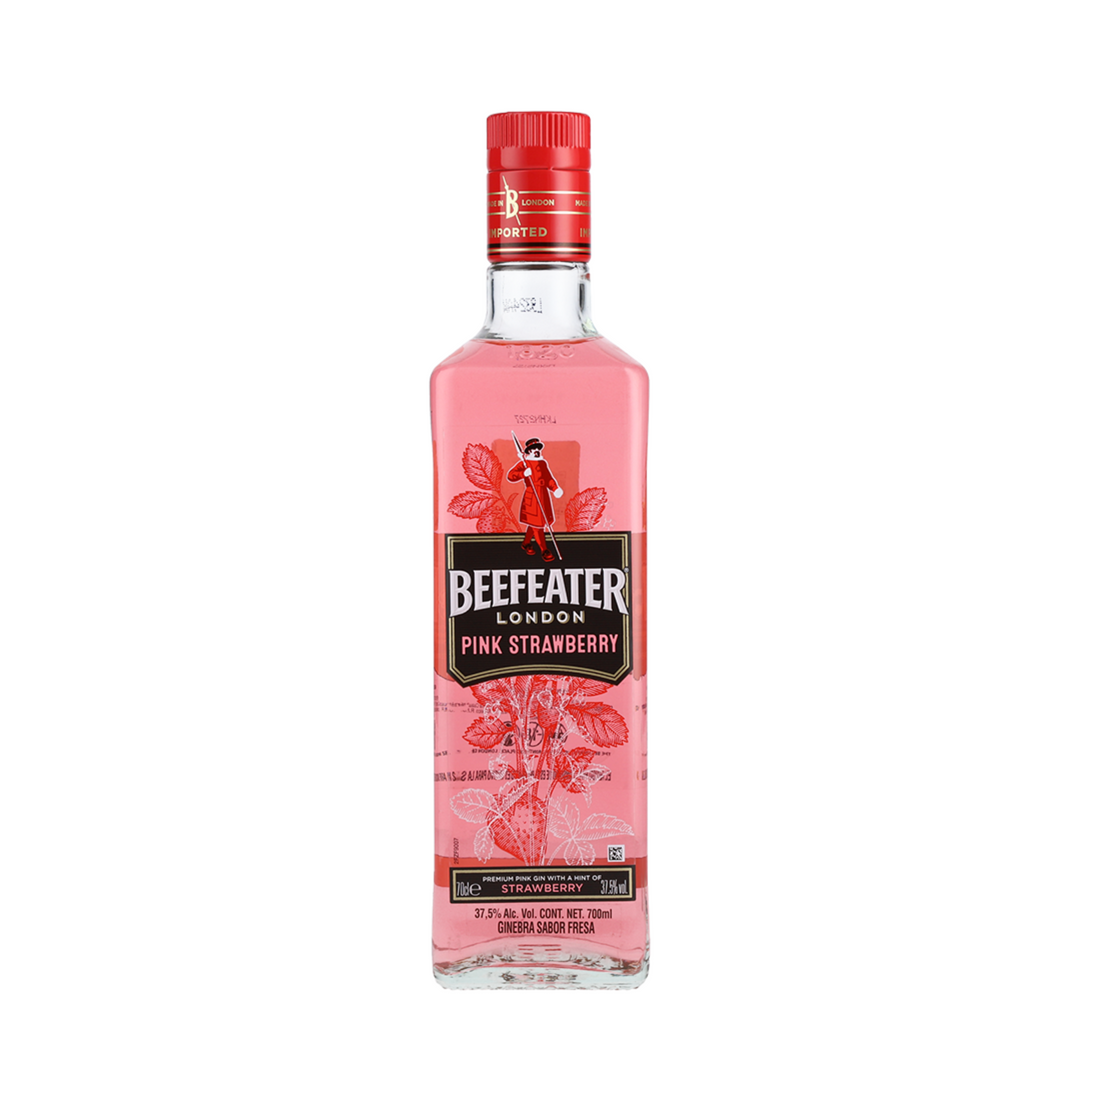 Beefeater London Pink Strawberry Gin, 700mL